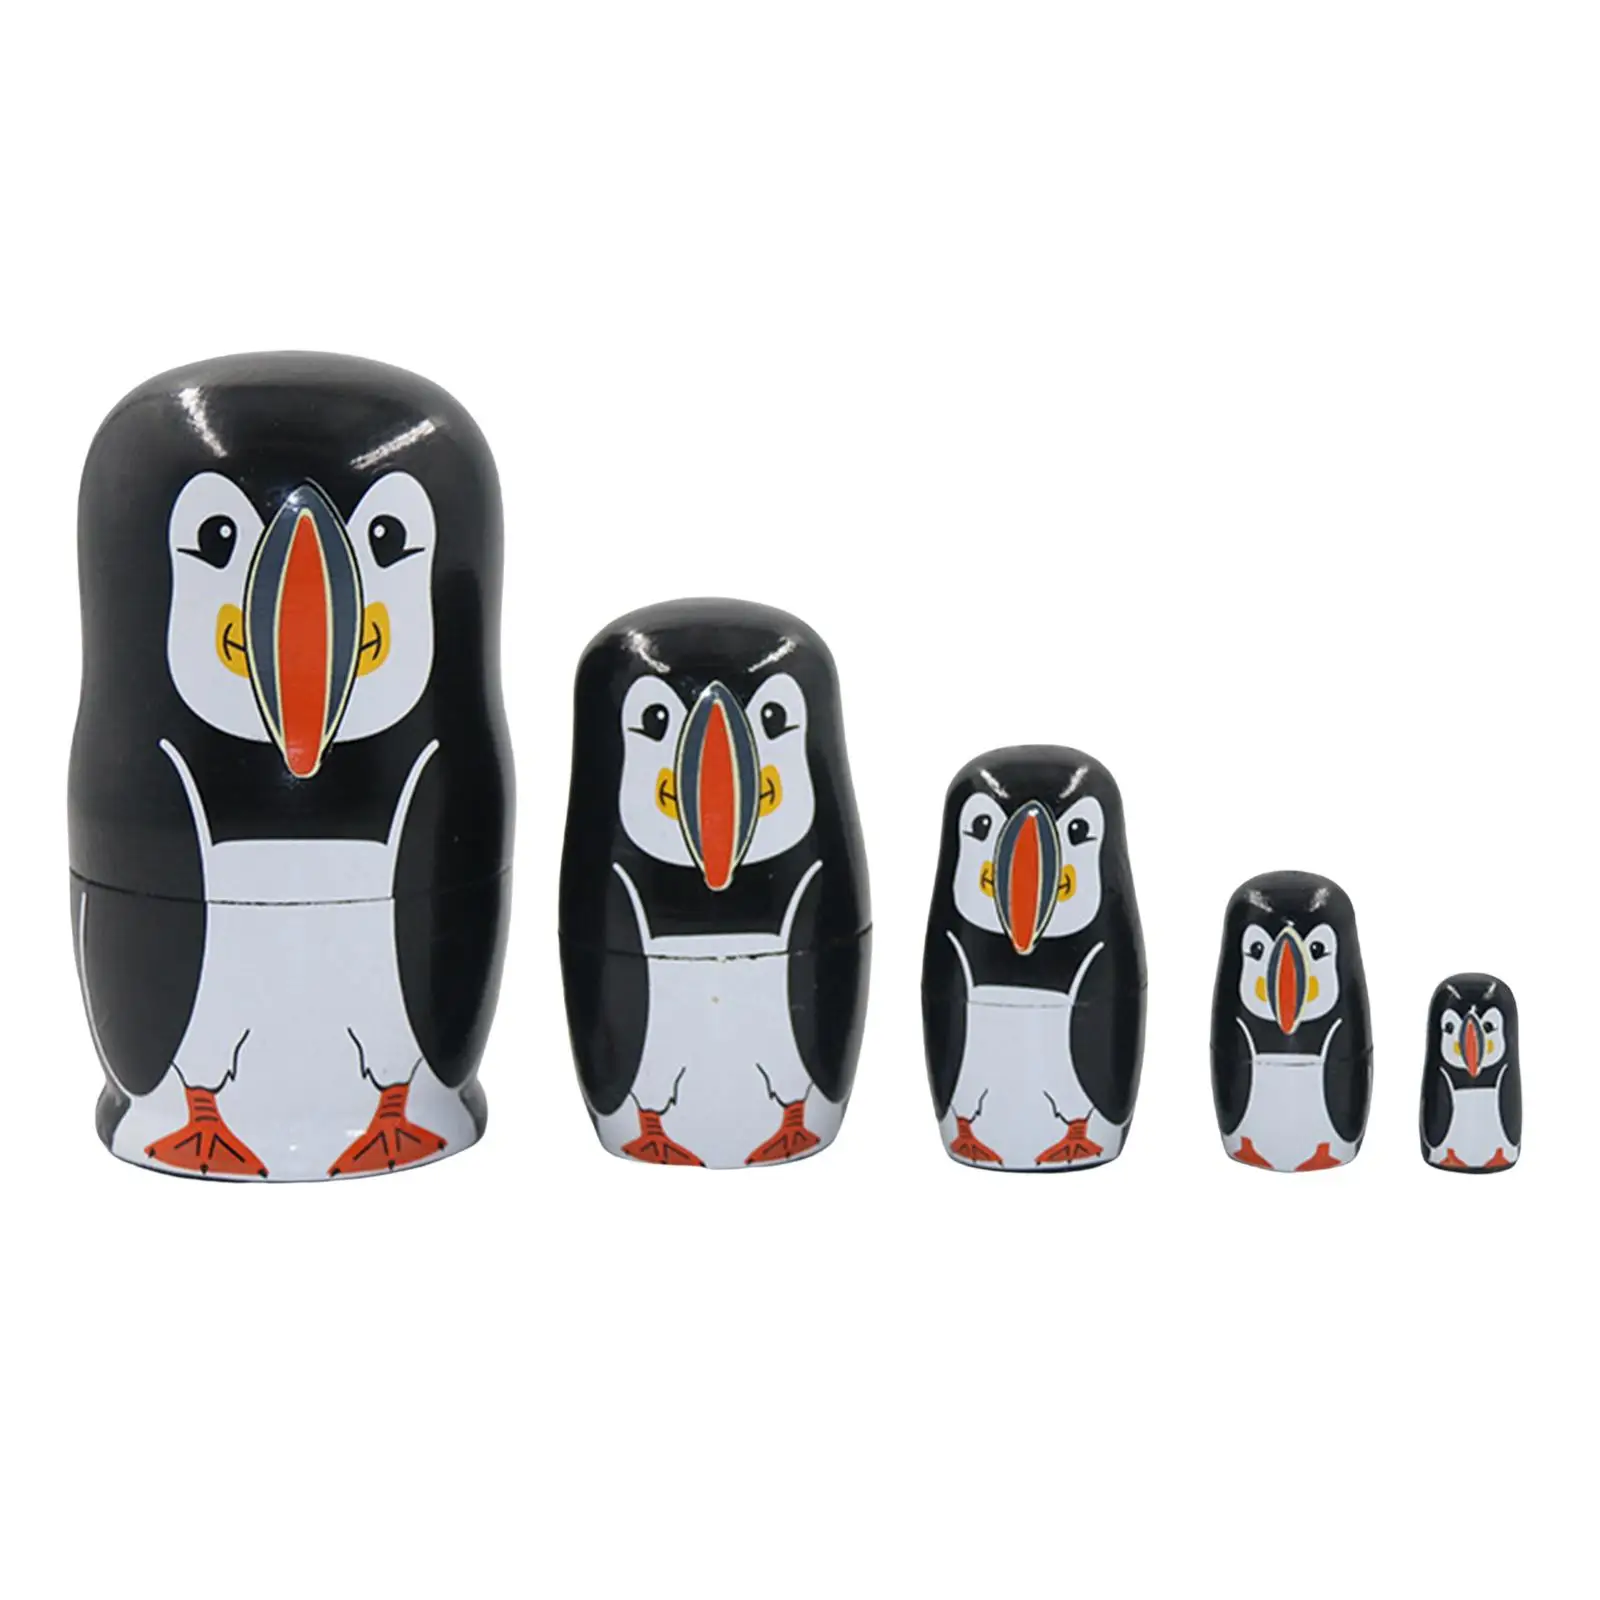 Cute Wooden Penguin Pattern Nesting Dolls Kits 5 Pieces Child Room Decoration Paintings Manually Done Colorful Popular Handmade